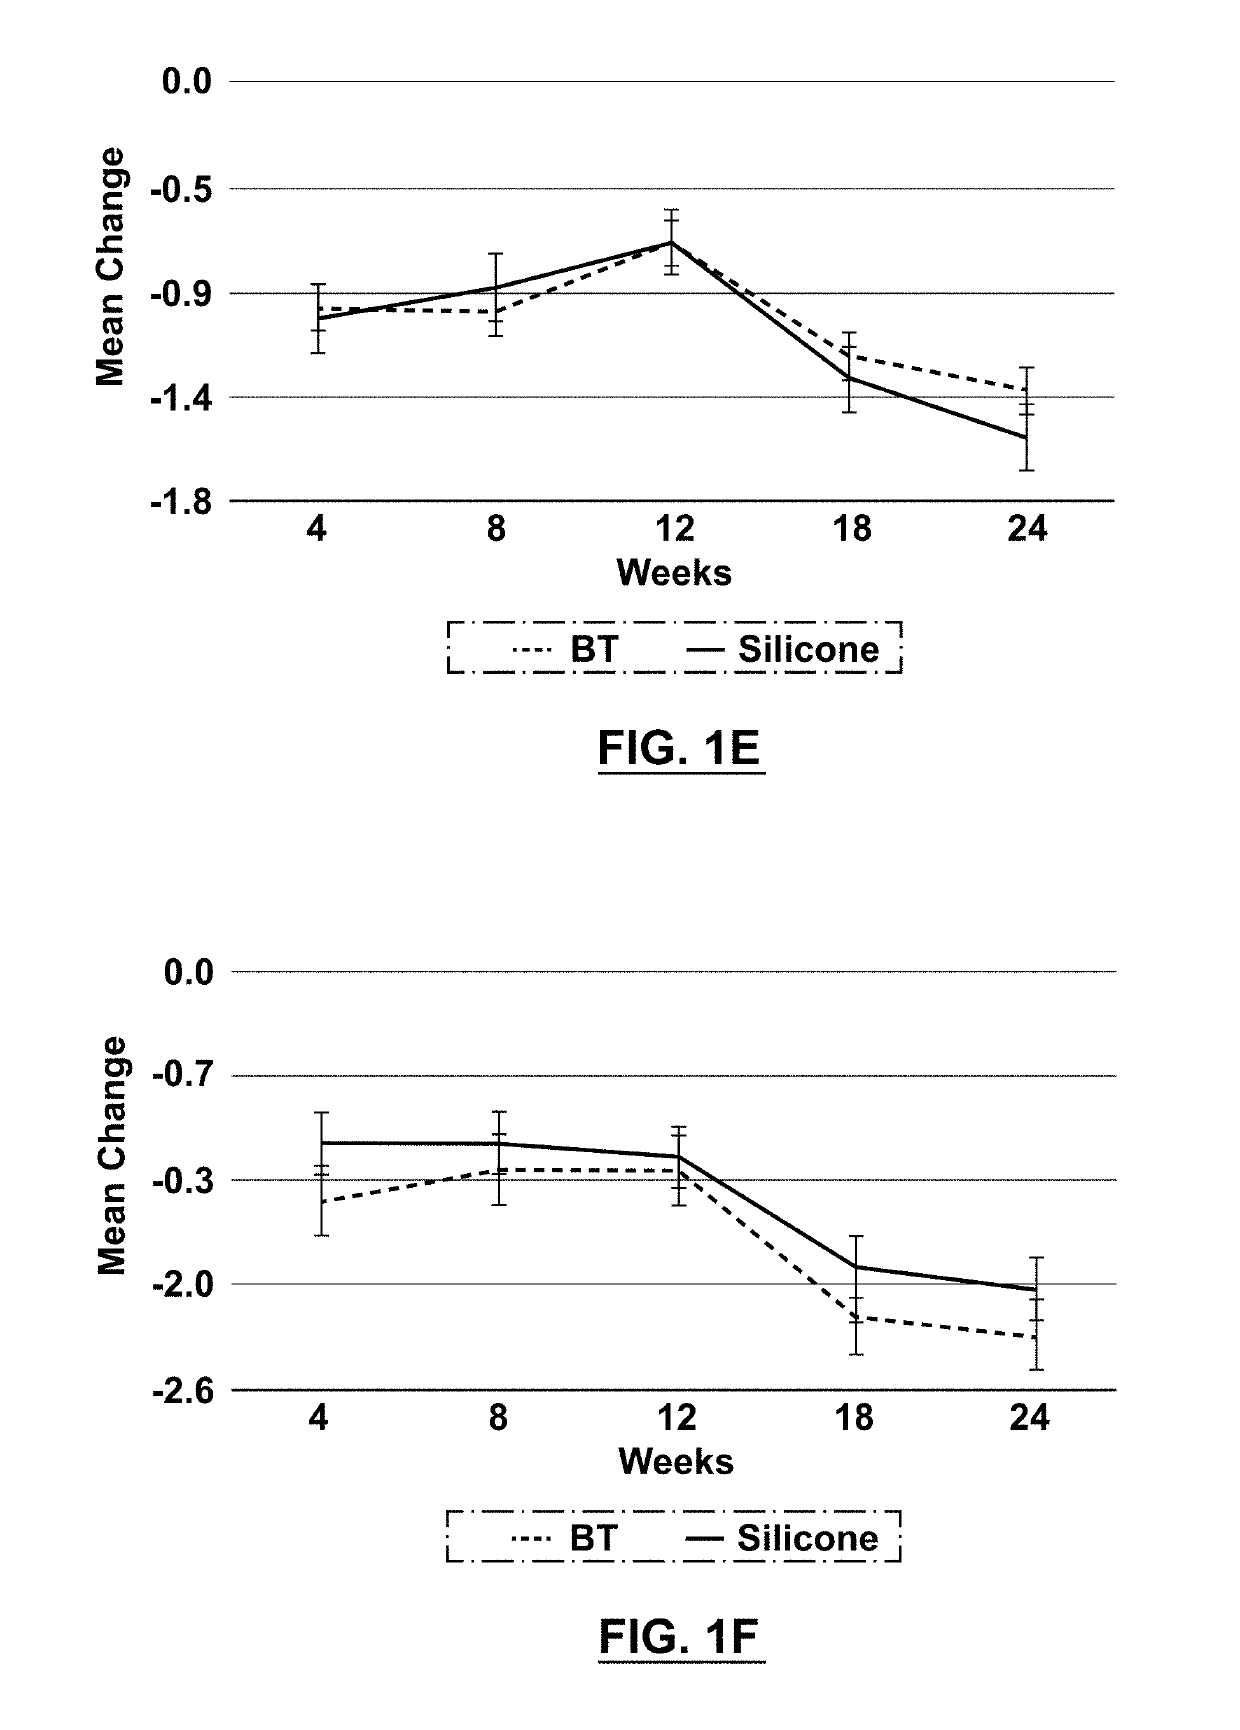 Biophotonic compositions and methods for reducing scarring